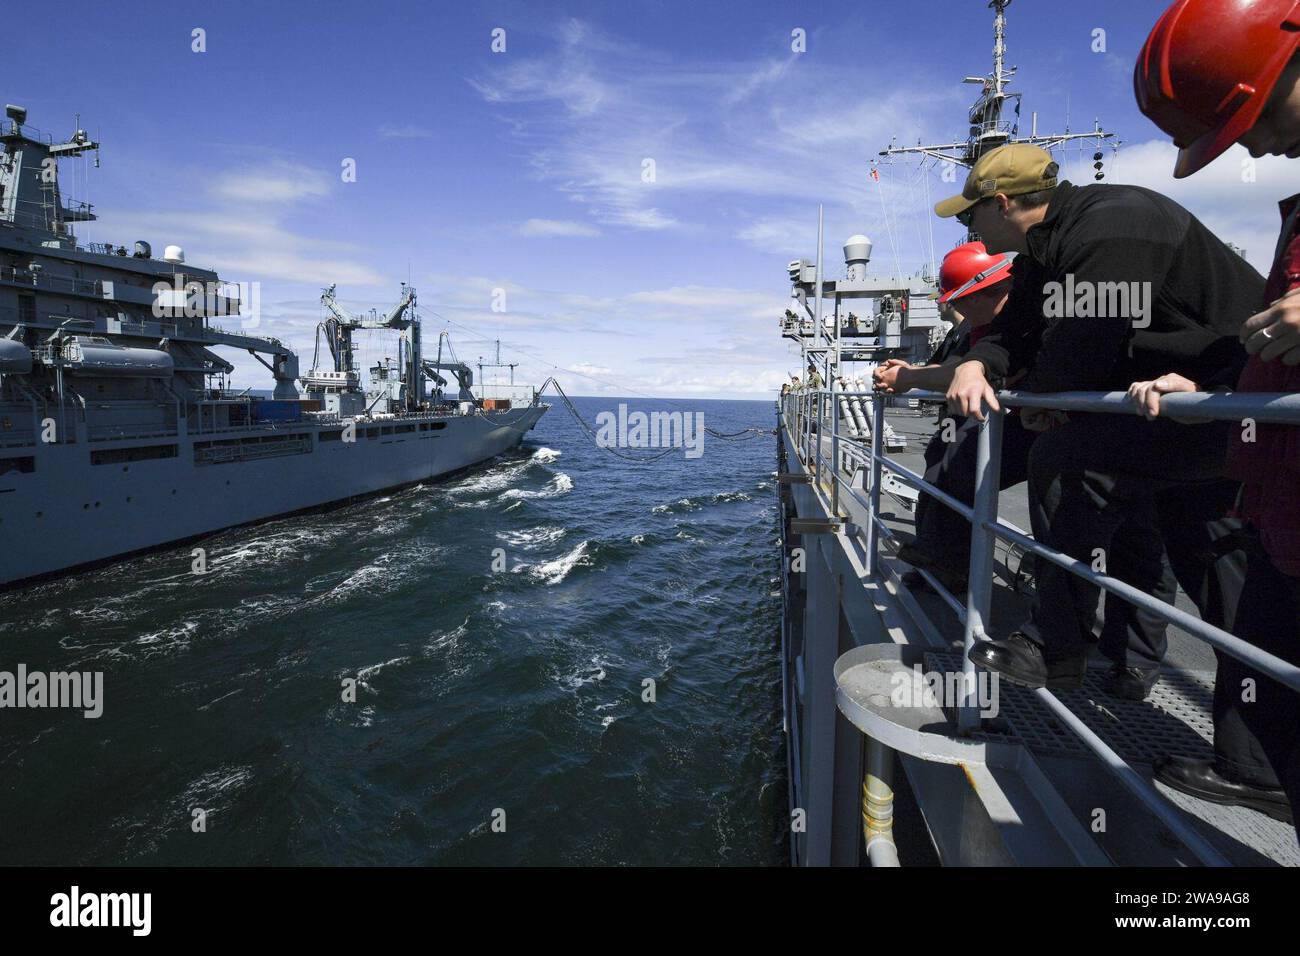 US military forces. 180605XT273-185 BALTIC SEA (June 5, 2018) The Blue Ridge-class command and control ship USS Mount Whitney (LCC 20) conducts a replenishment-at-sea with the German Berlin-class replenishment ship FGS Frankfurt A.M. (A1412) in the Baltic Sea, June 5, during exercise Baltic Operations (BALTOPS) 2018. BALTOPS is the premier annual maritime-focused exercise in the Baltic region and one of the largest exercises in Northern Europe enhancing flexibility and interoperability among allied and partner nations. (U.S. Navy photo by Mass Communication Specialist 1st Class Justin Stumberg Stock Photo